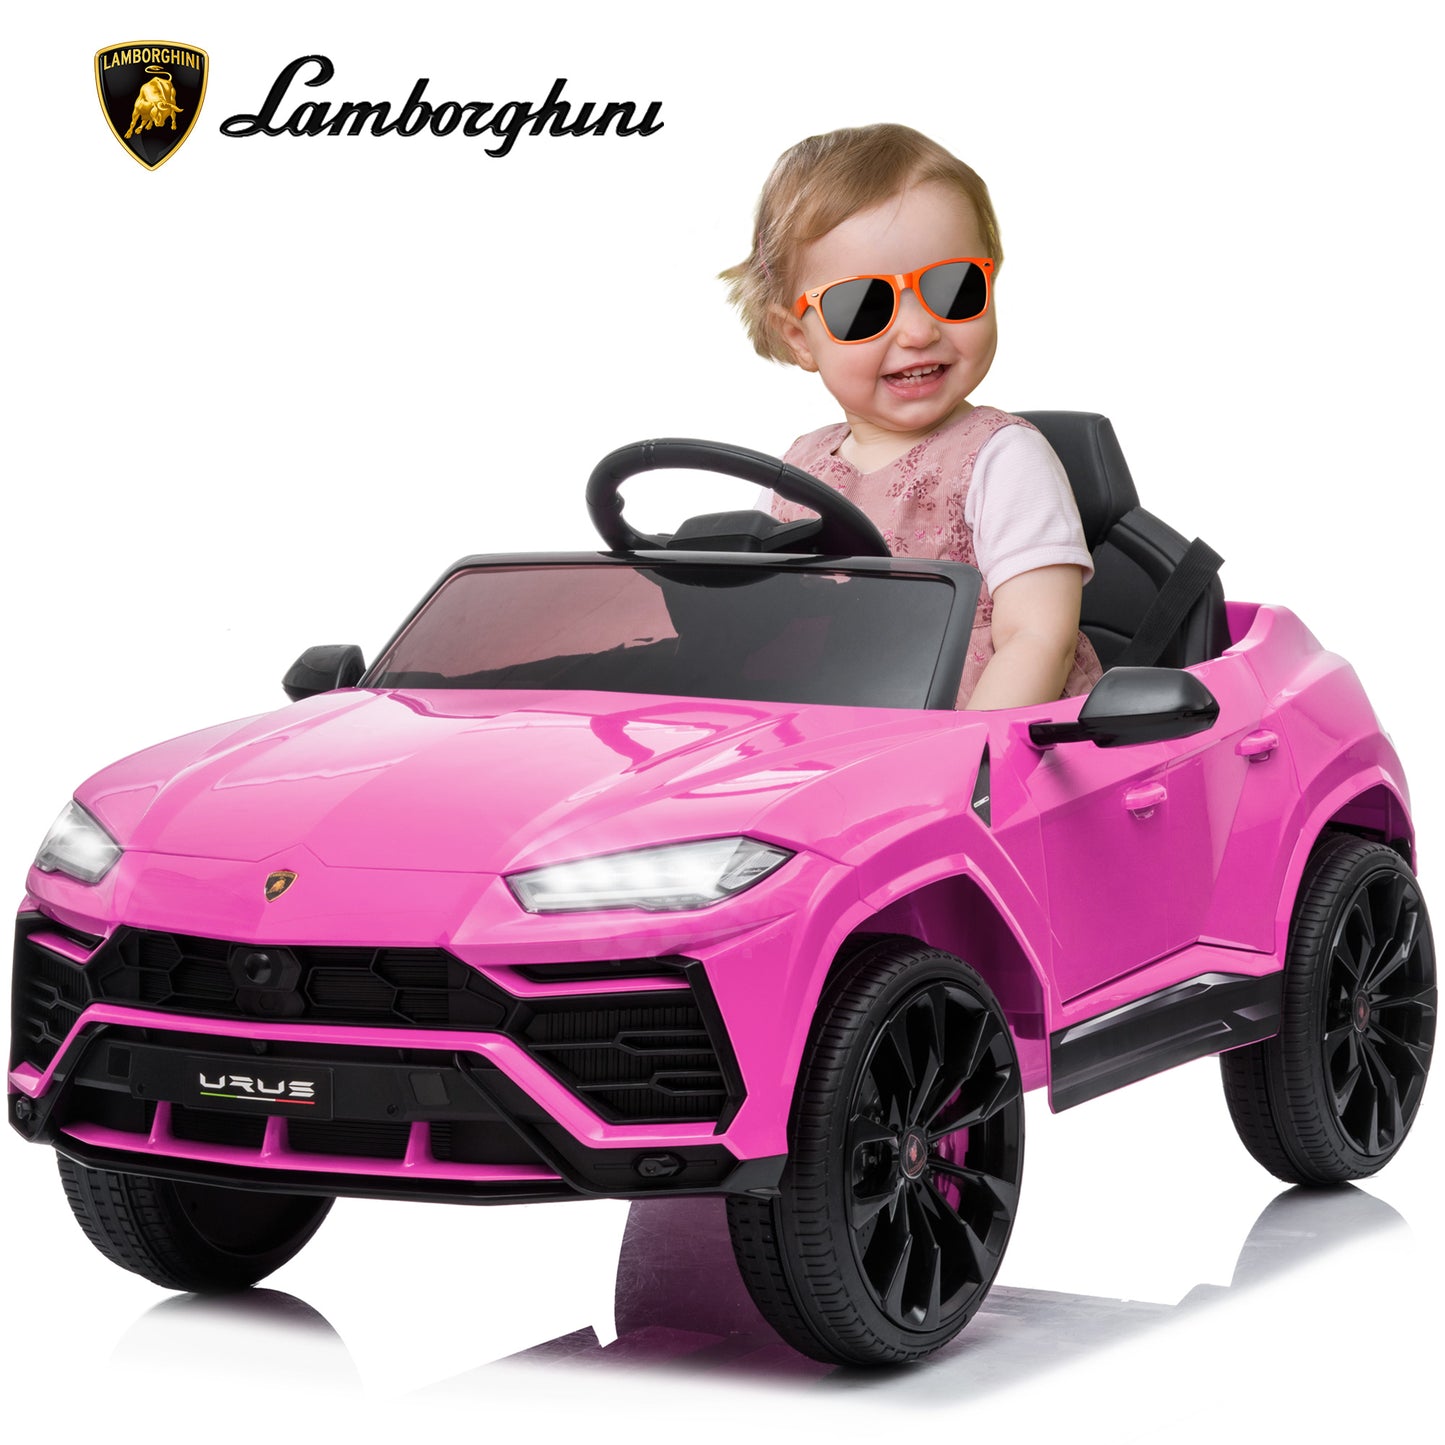 SYNGAR Licensed Lamborghini 12 V Powered Ride on Cars with Remote Control, 3 Speeds, LED Lights, MP3 Player, Horn, Kids Electric Vehicles Ride on Toy for Boys Girls, Pink